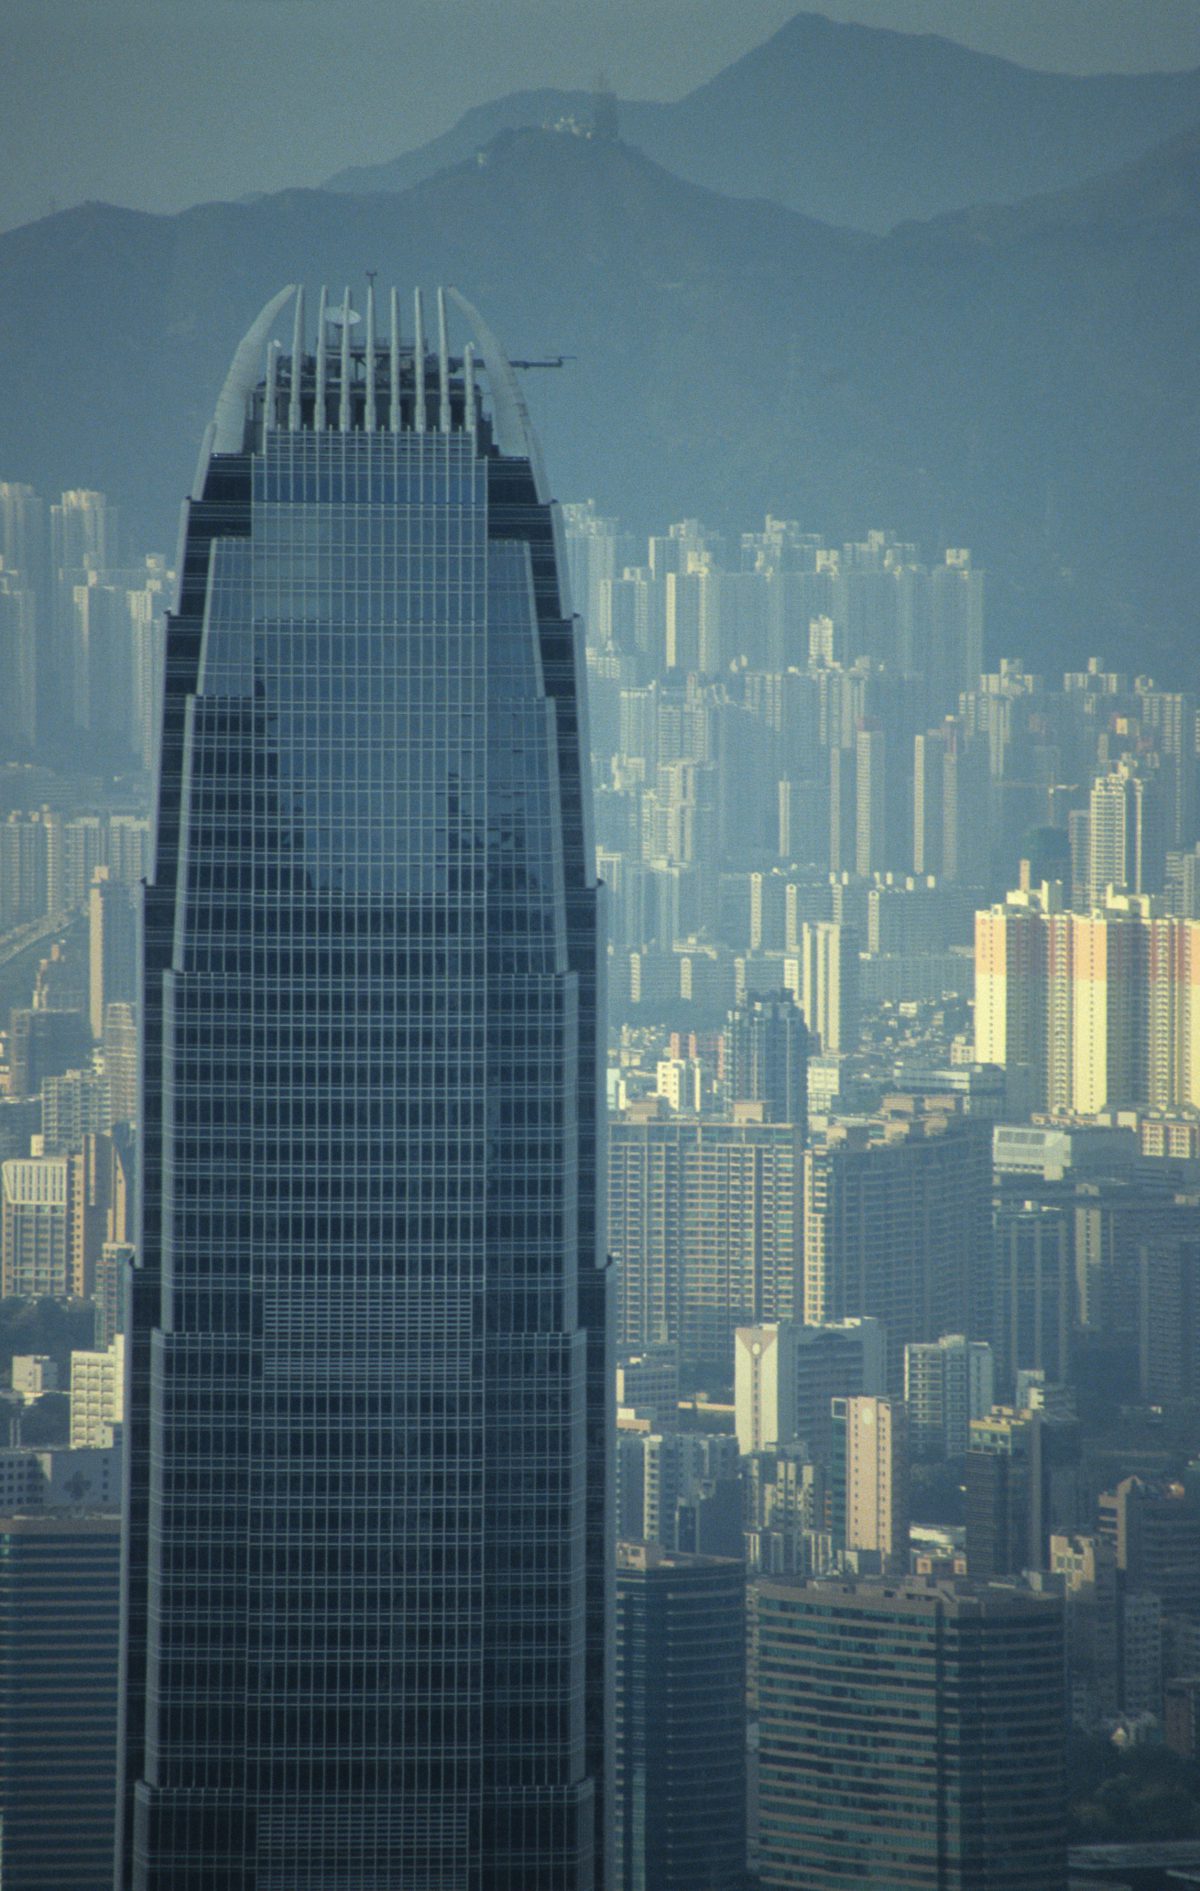 2 IFC - Two International Finance Centre 412m high, building, view, height, mountain, city